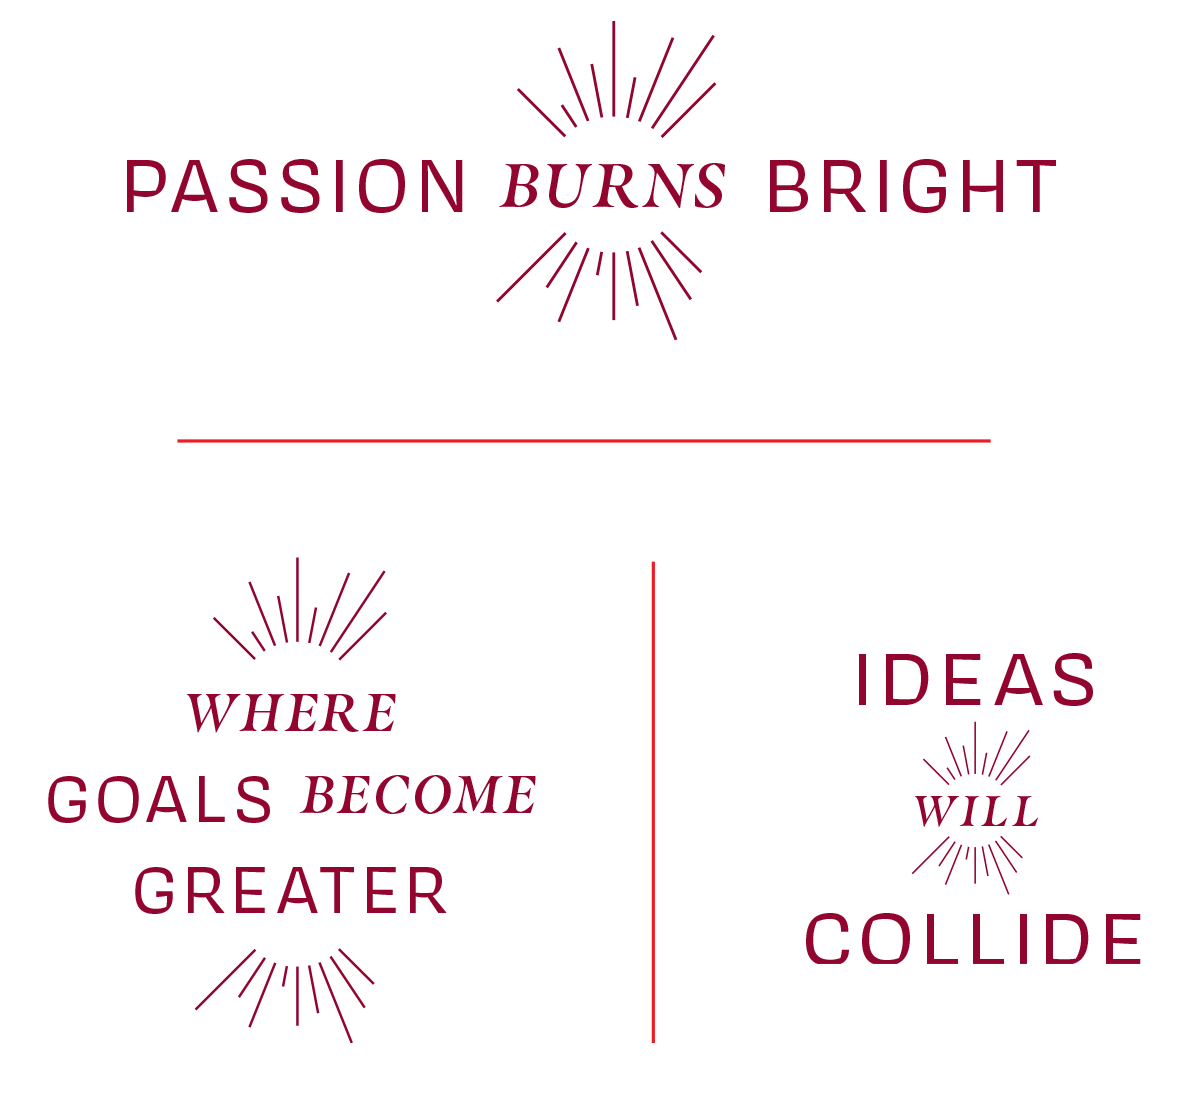 3 headline treatments with text and spark lines. Top: Passion Burns Bright; bottom left: Where Goals Become Greater; bottom left: Ideas Will Collide